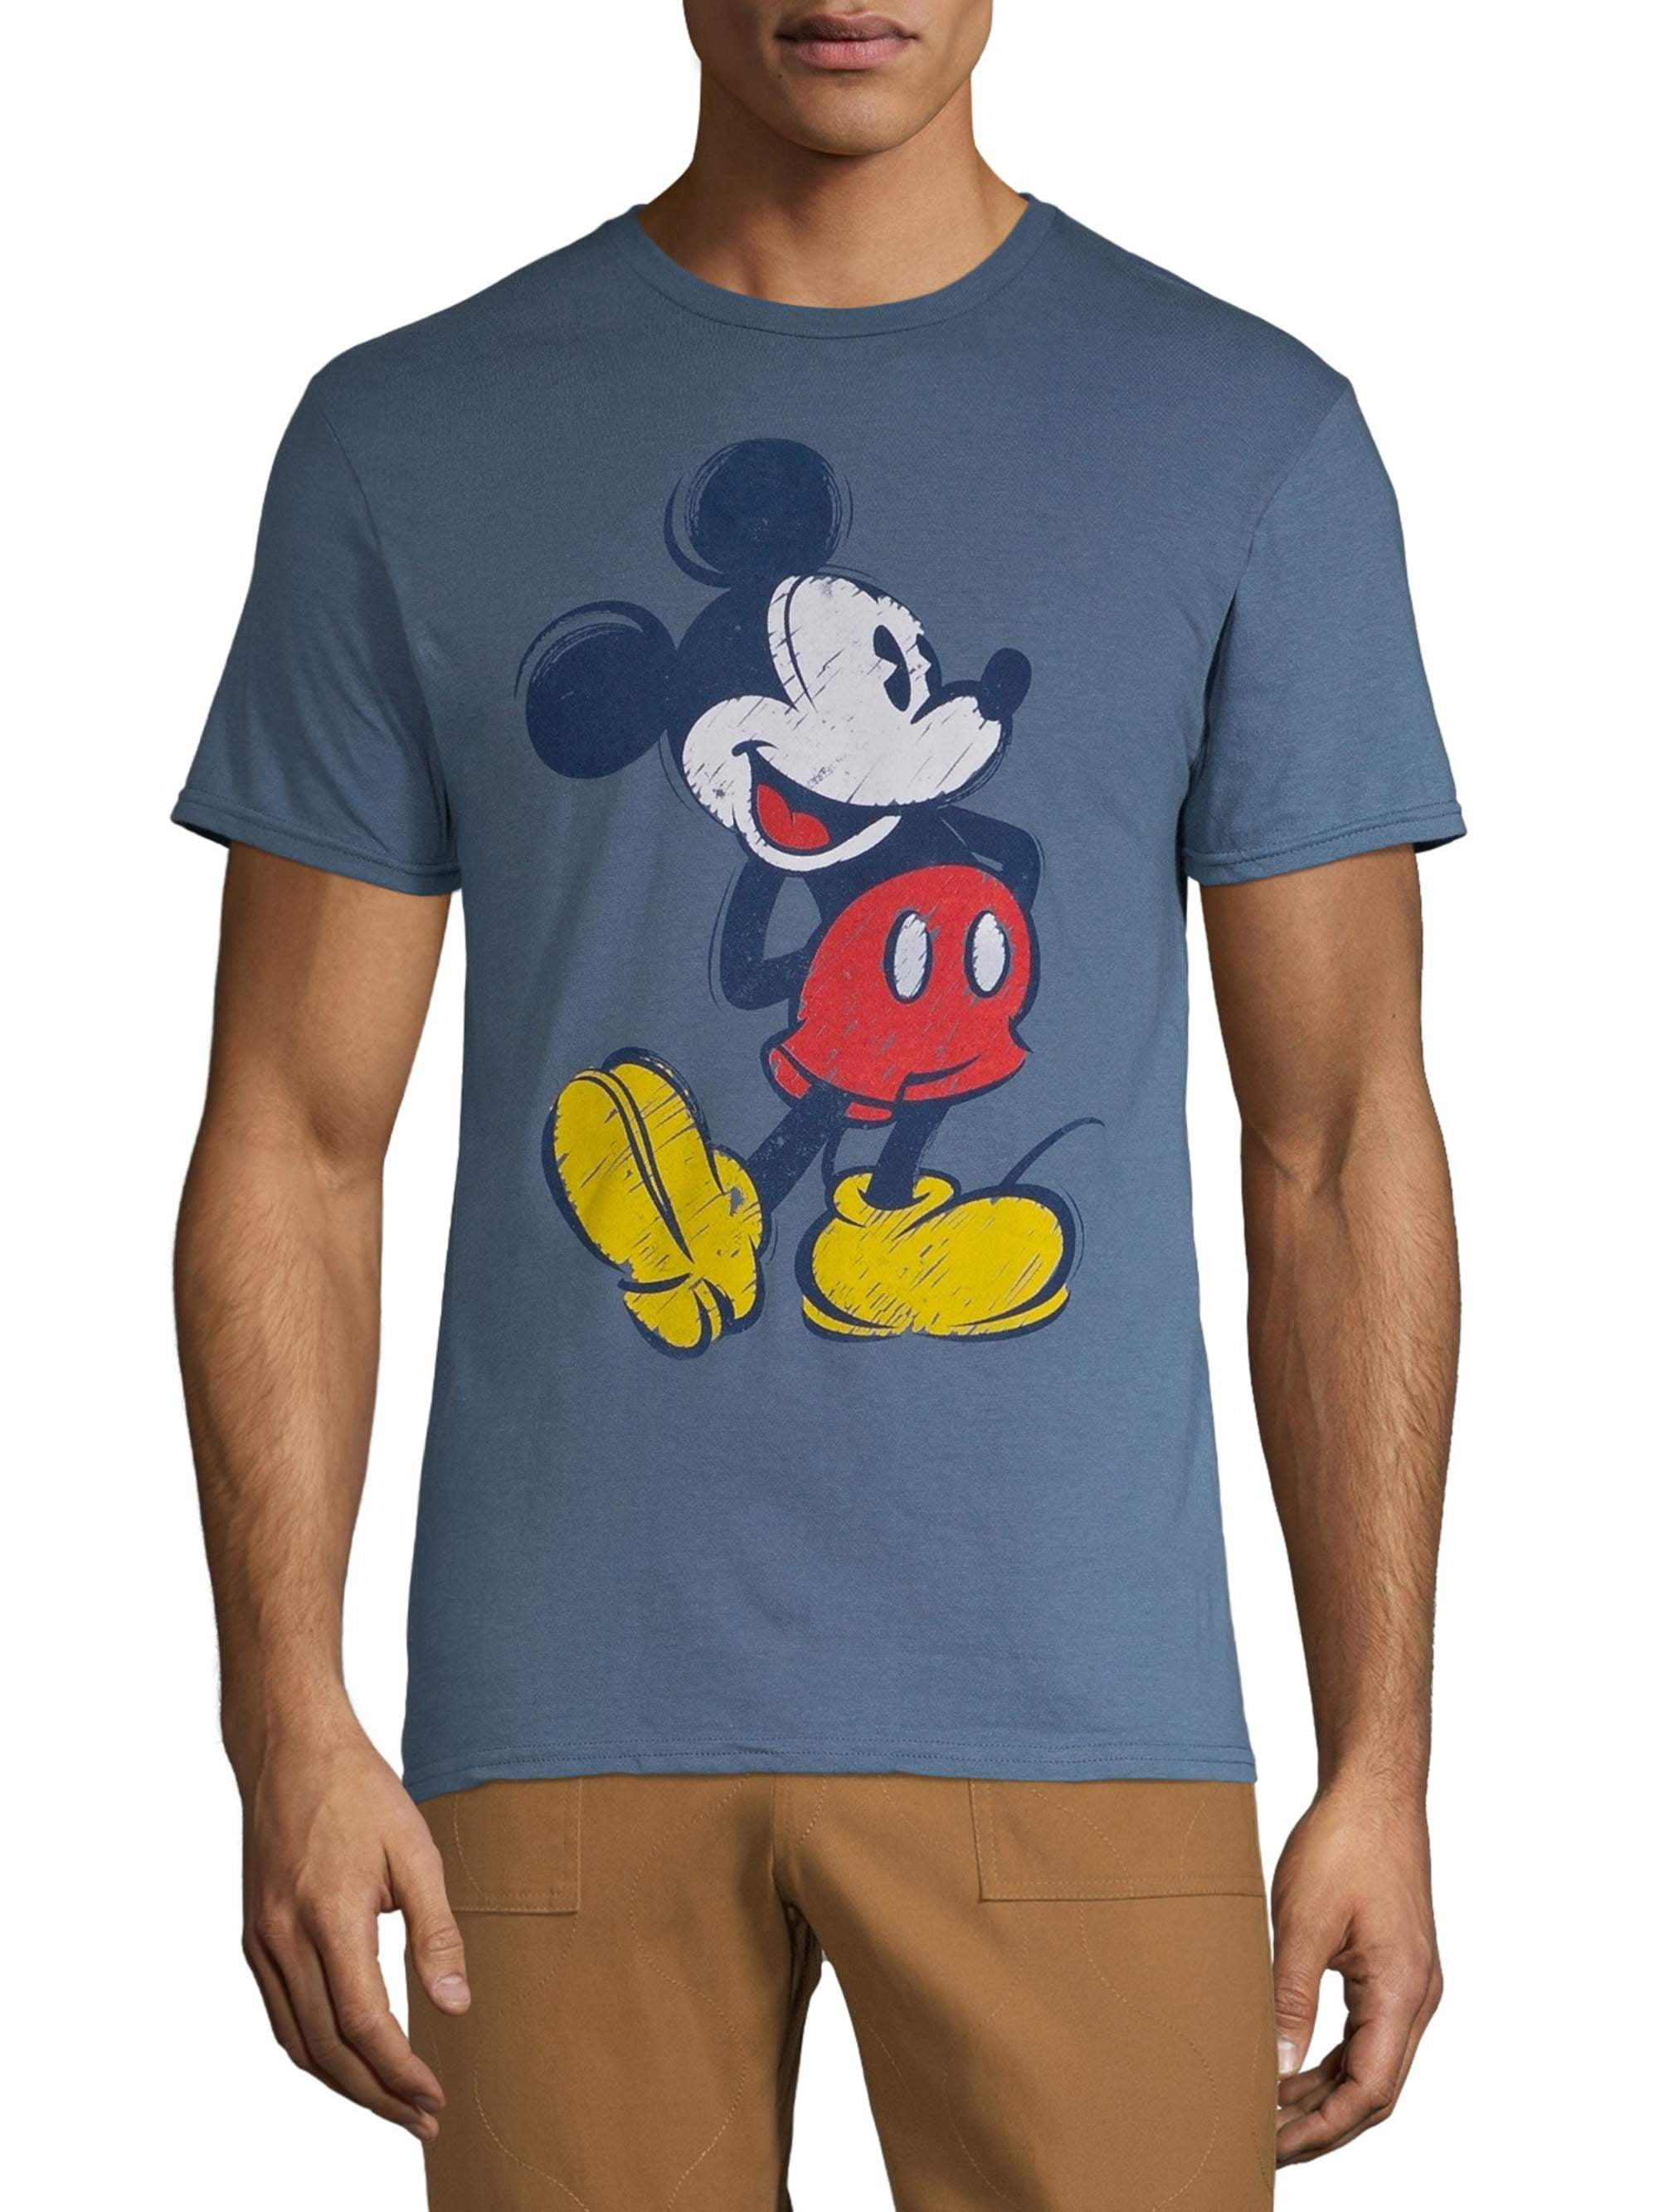 Disney Youth Boys T Shirt Tee Top Mickey Mouse Grill Big Face Navy Blue 